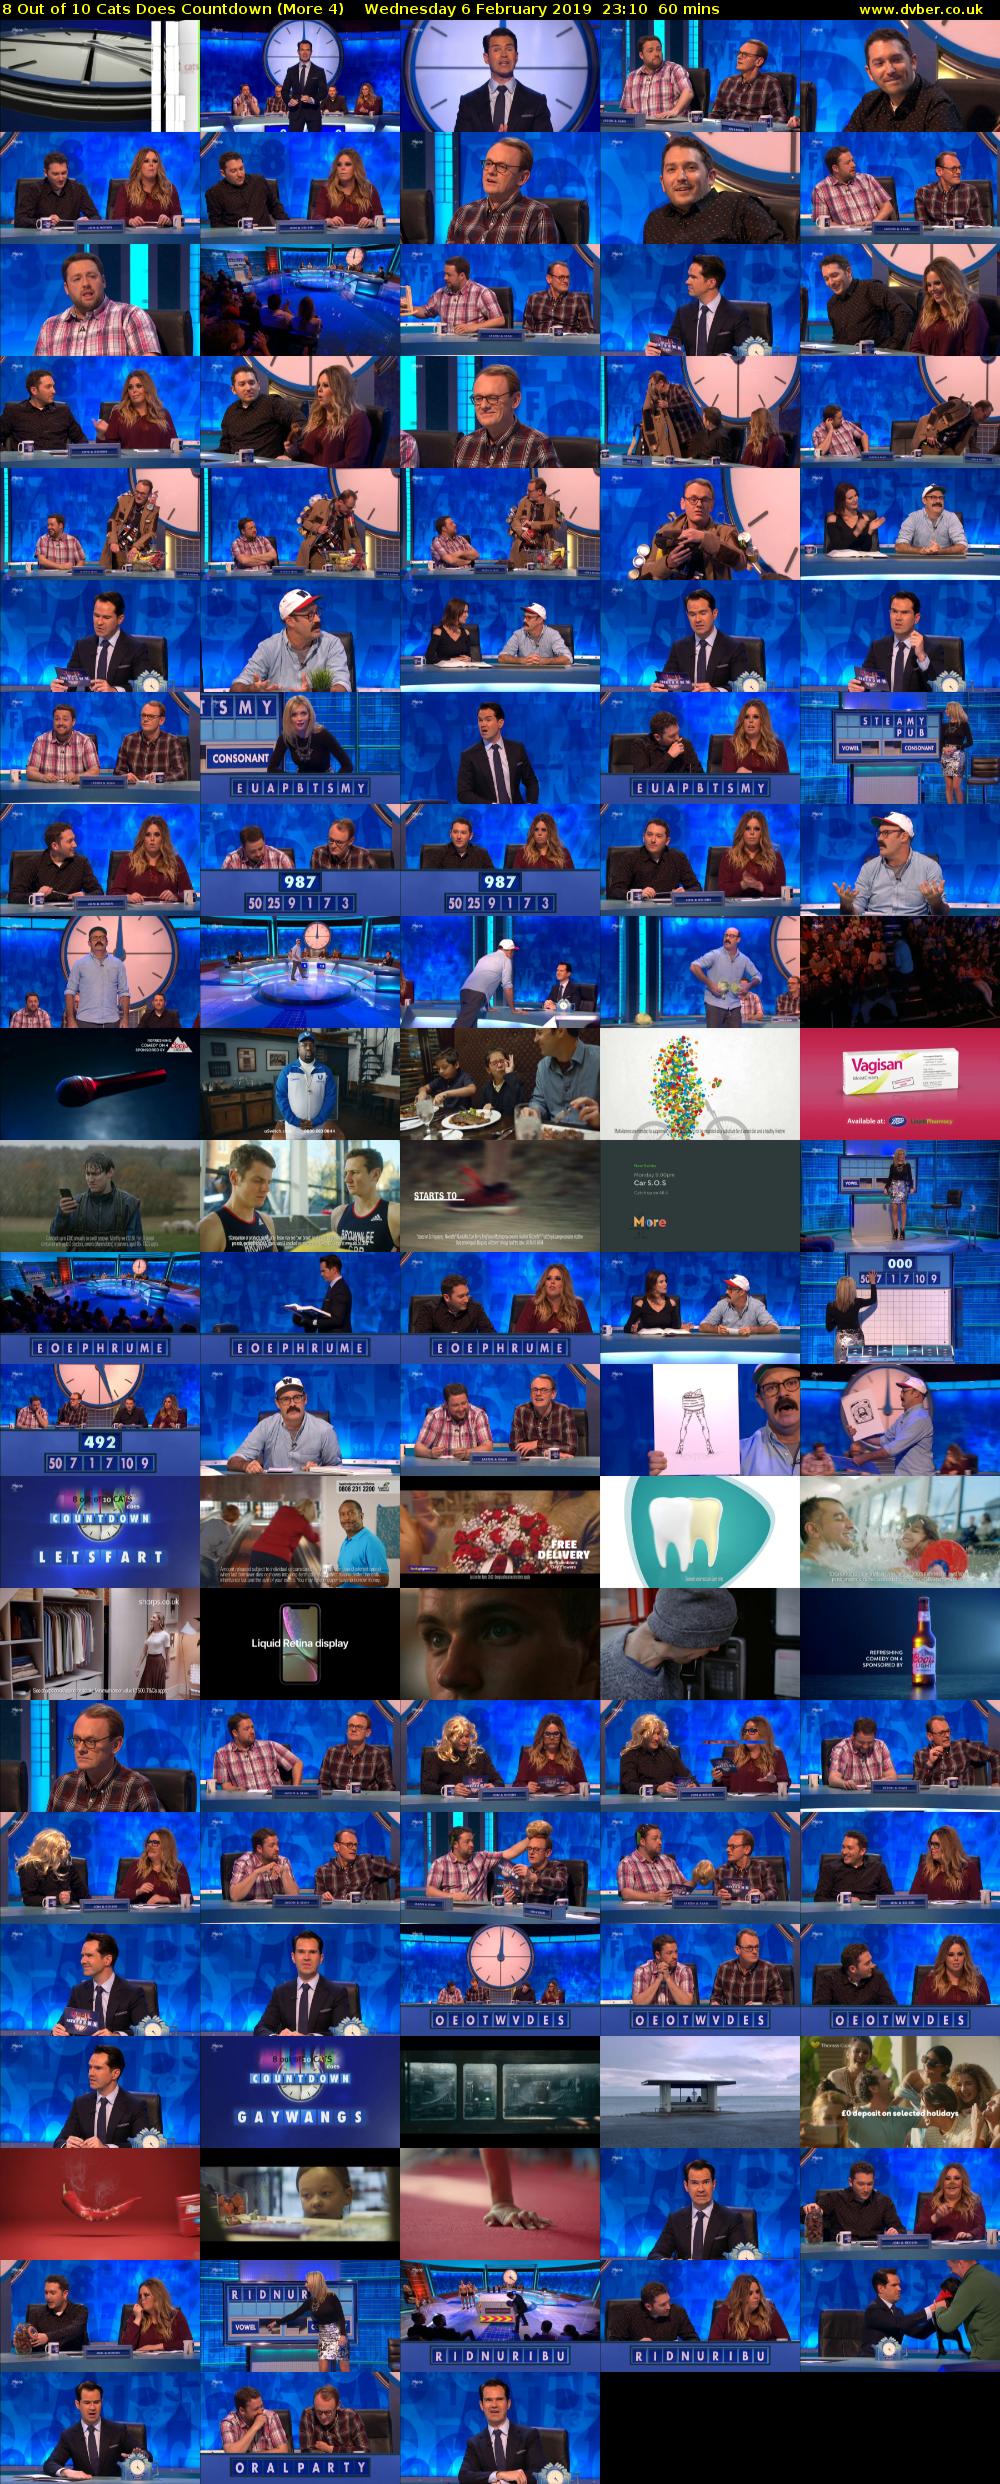 8 Out of 10 Cats Does Countdown (More 4) Wednesday 6 February 2019 23:10 - 00:10